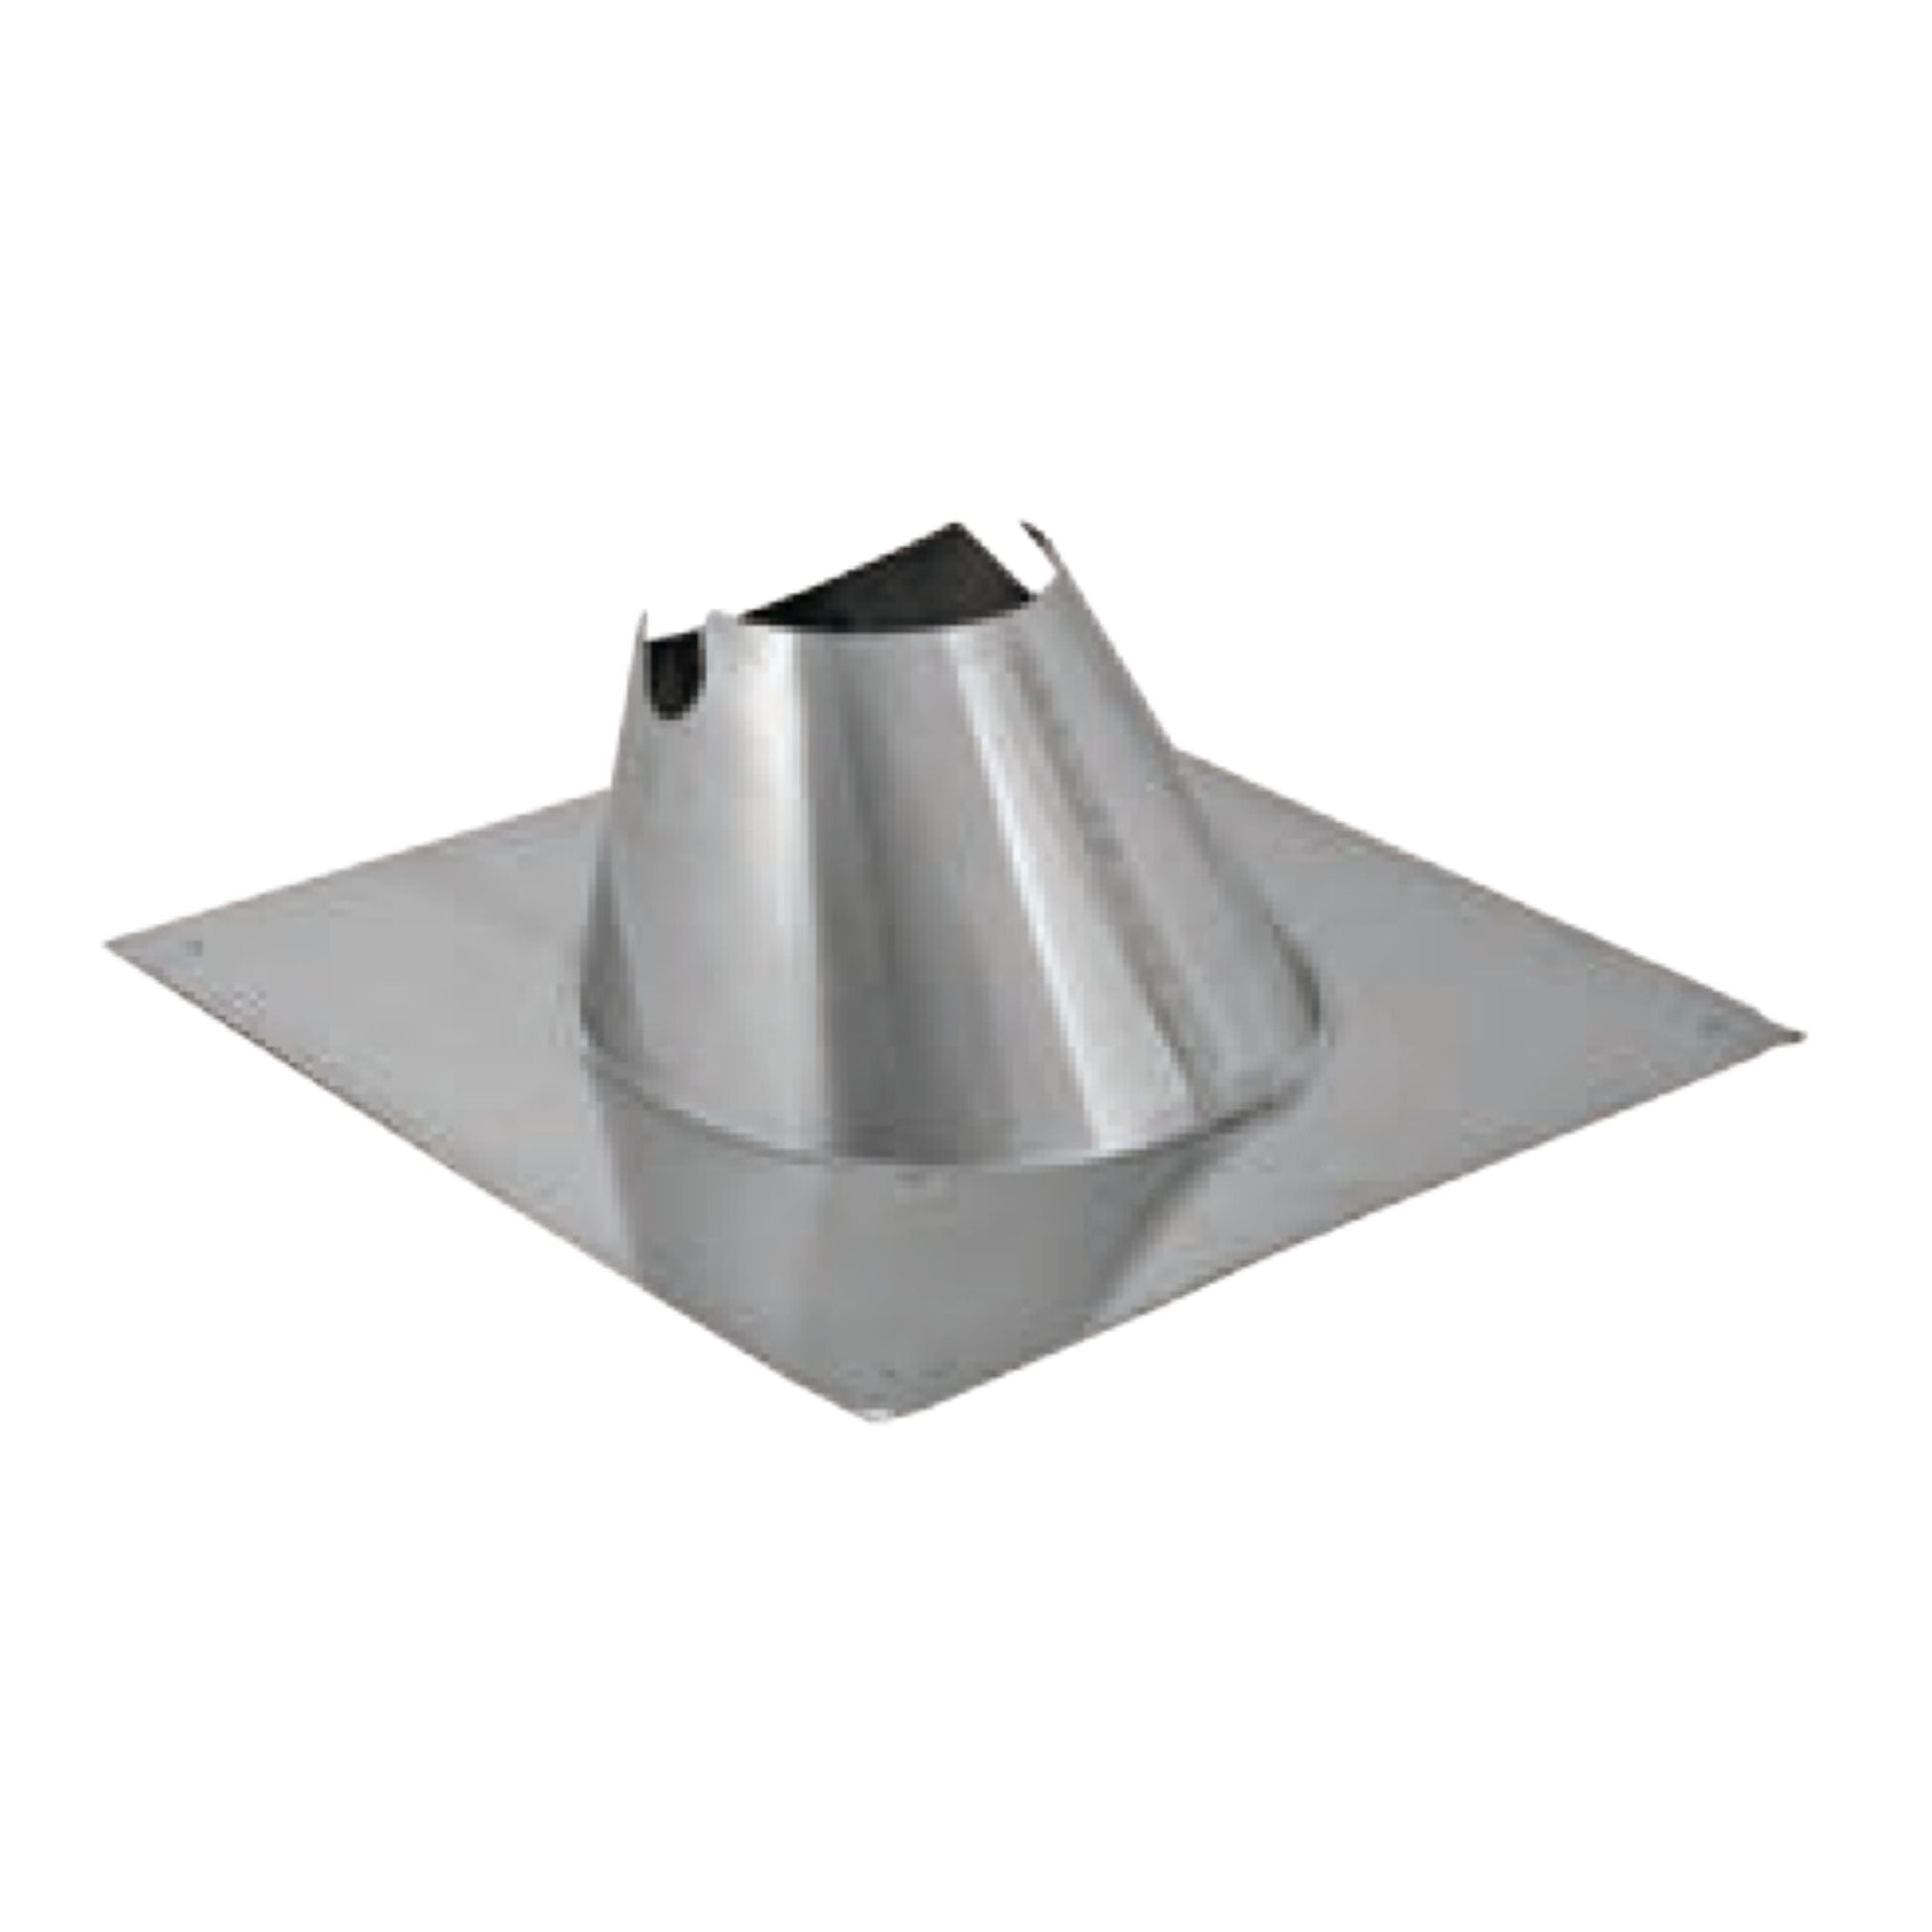 DuraVent FasNSeal 6" 29-4C Stainless Steel Variable Pitch Roof Flashing